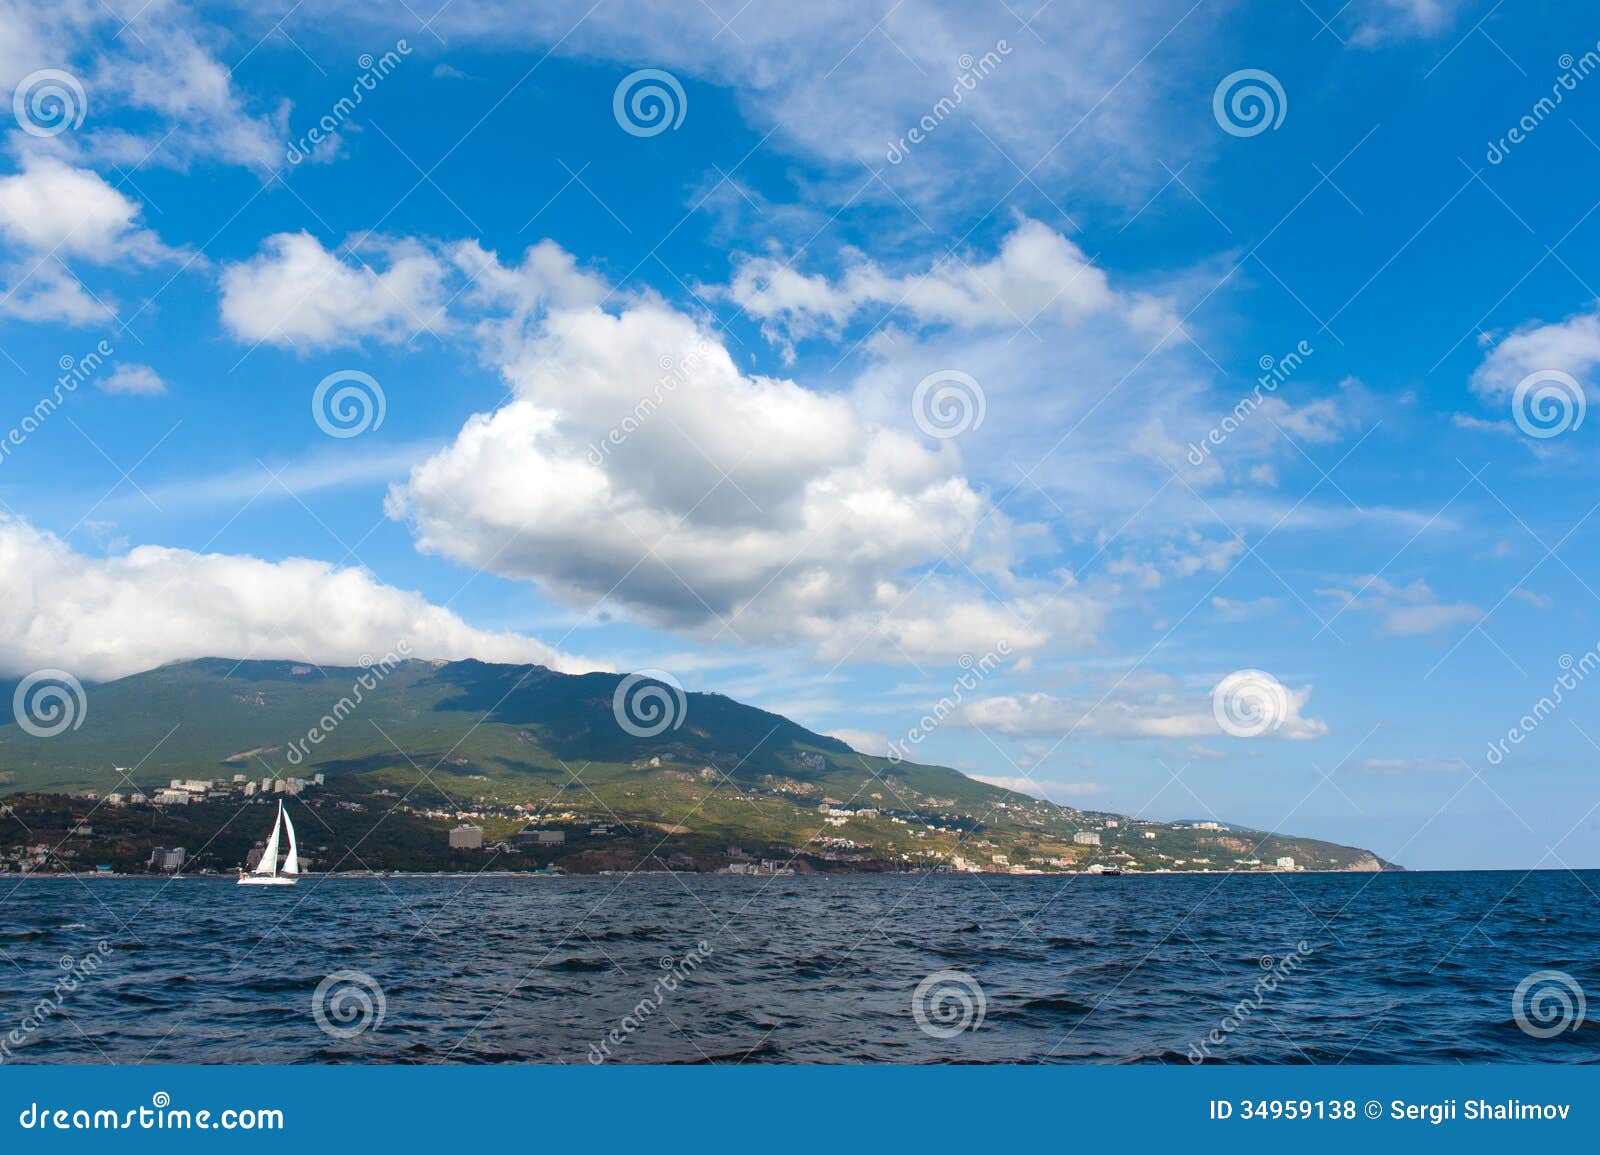 Small Sailing Boat In Blue And Calm Sea Royalty Free Stock Photos 